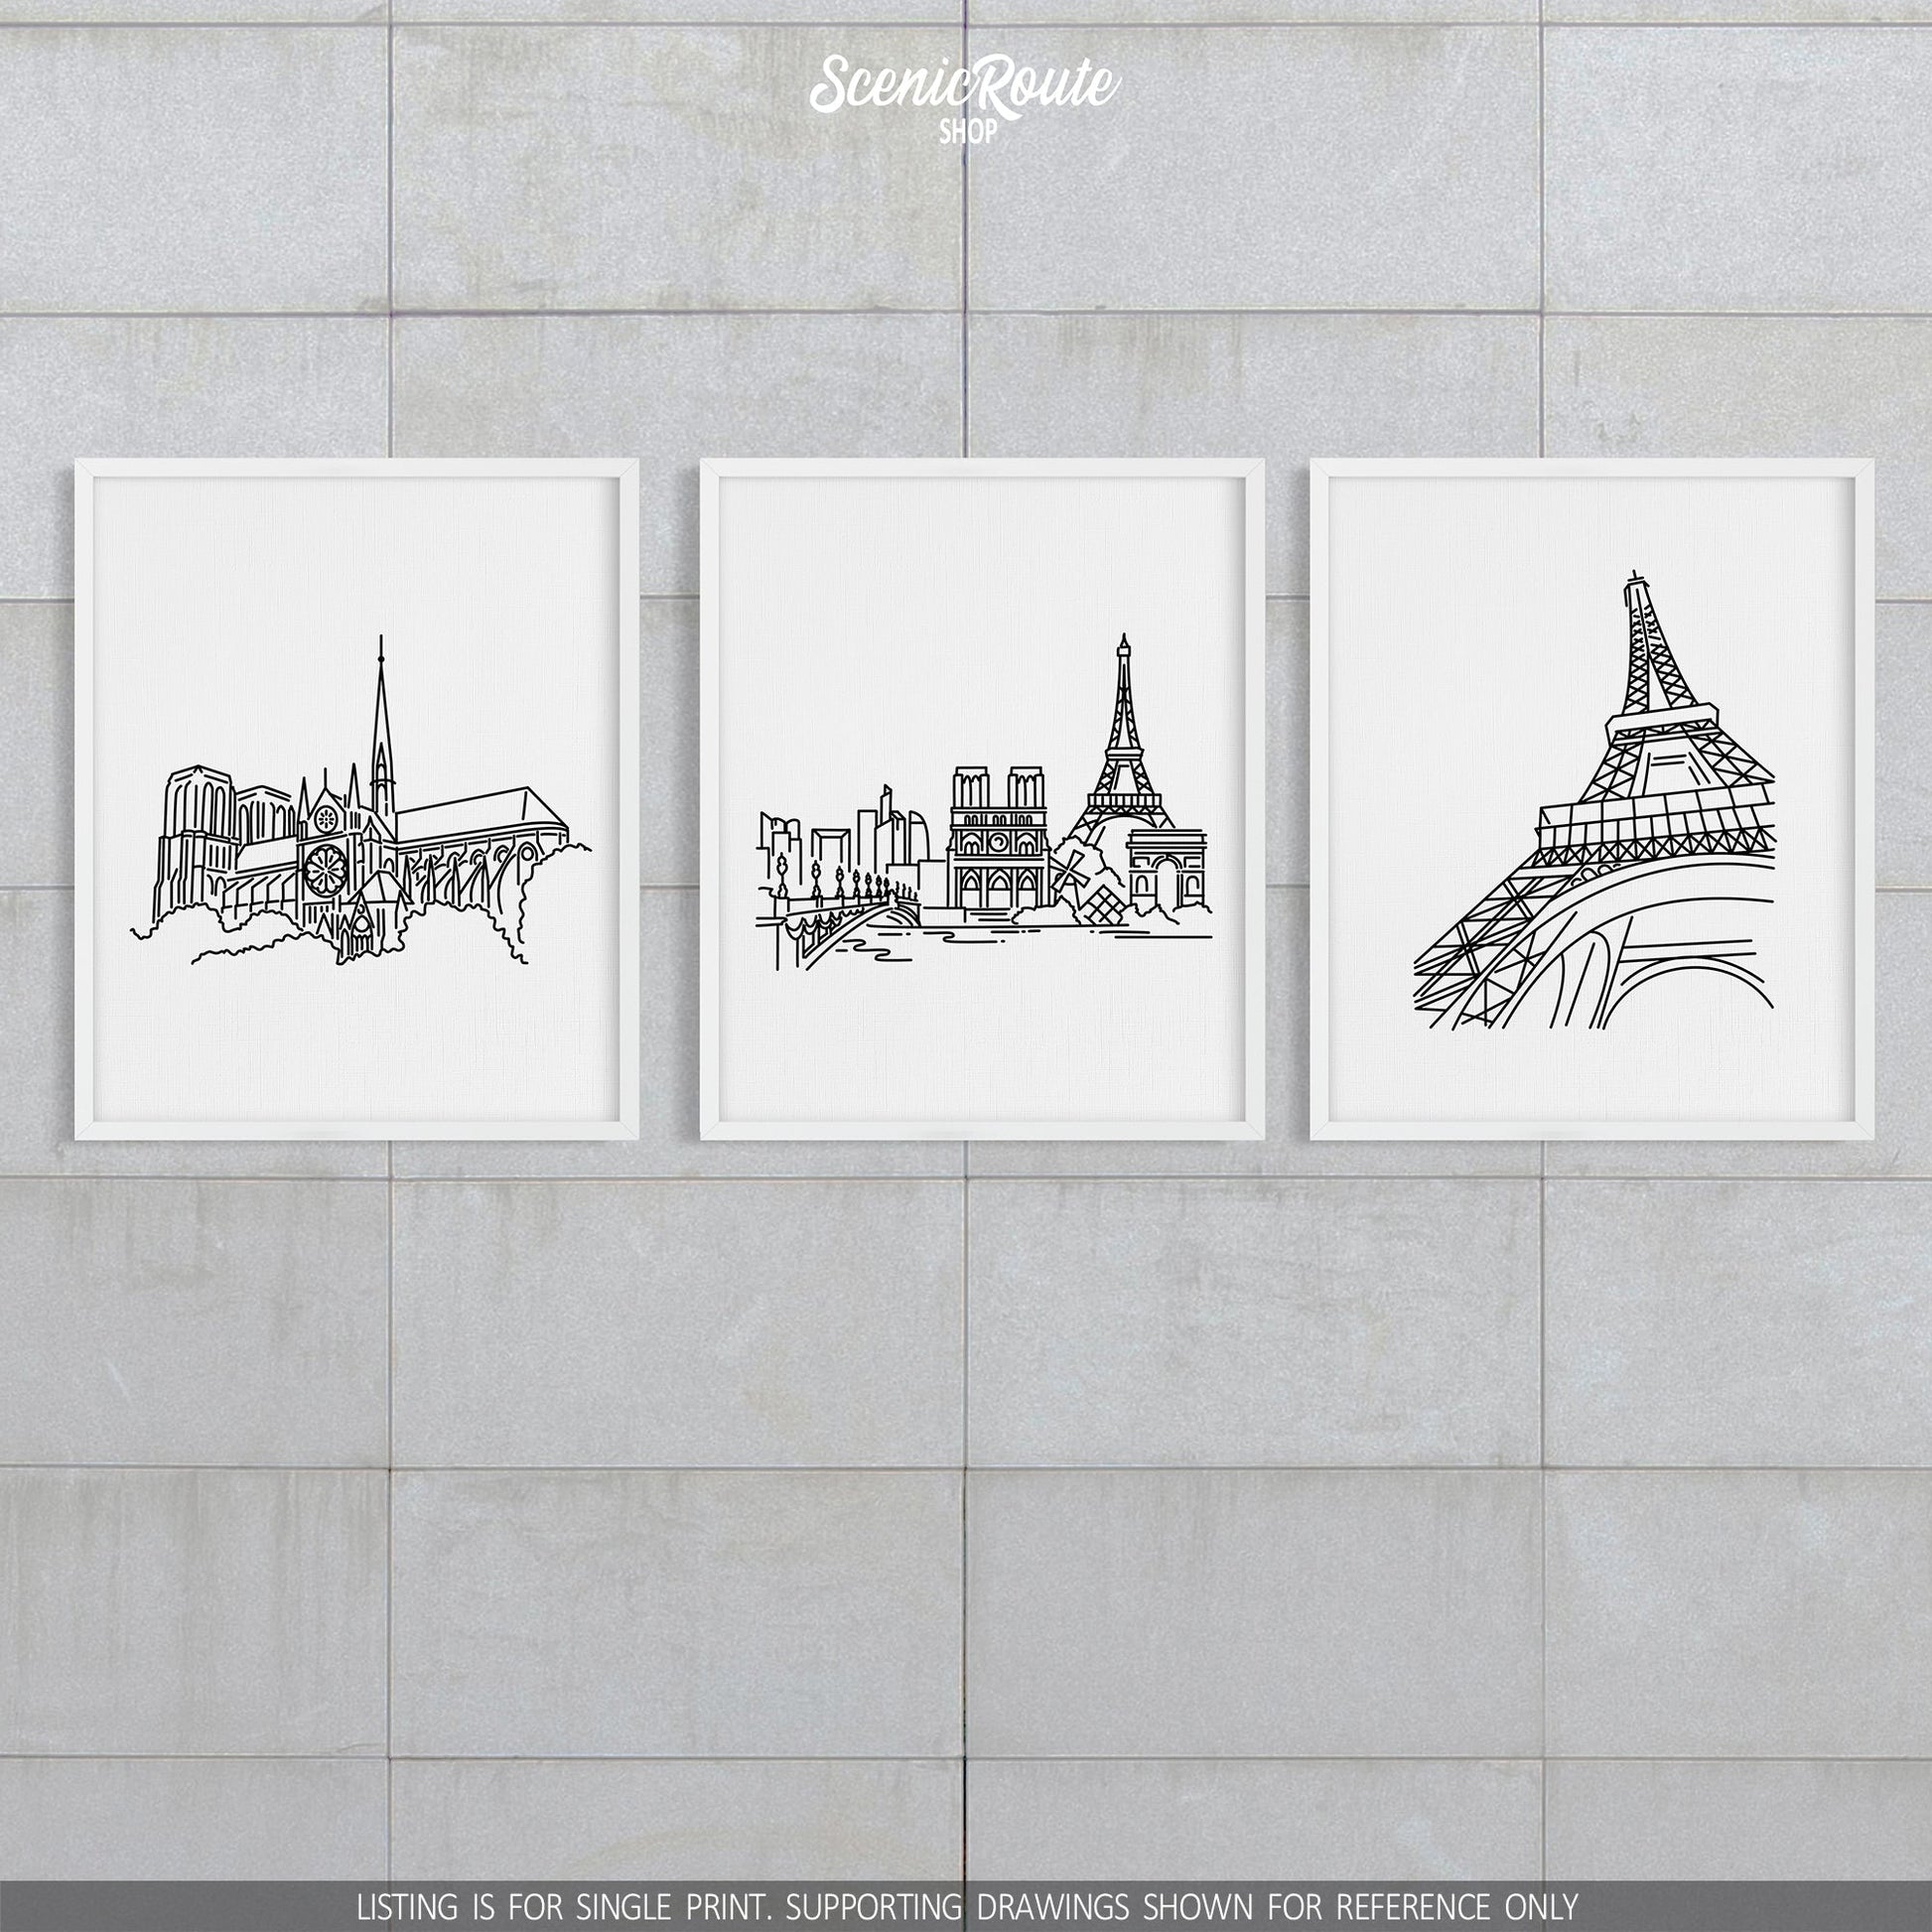 A group of three framed drawings on a block wall. The line art drawings include the Notre Dame Cathedral, Paris Skyline, and Eiffel Tower